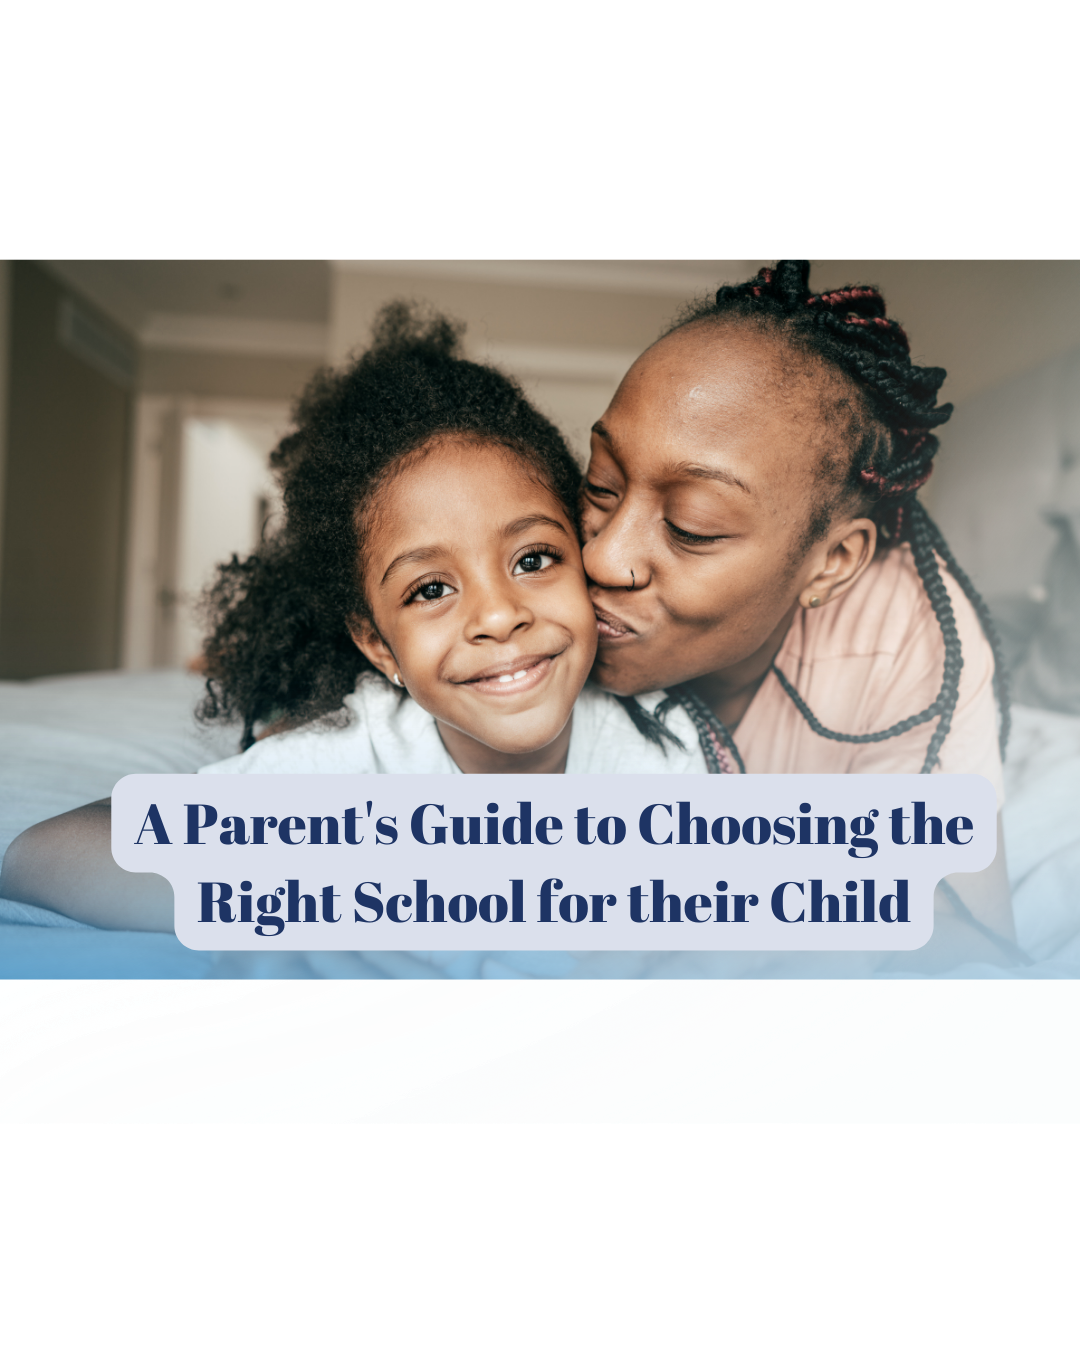 A Parent's Guide to Choosing the Right School for their Child